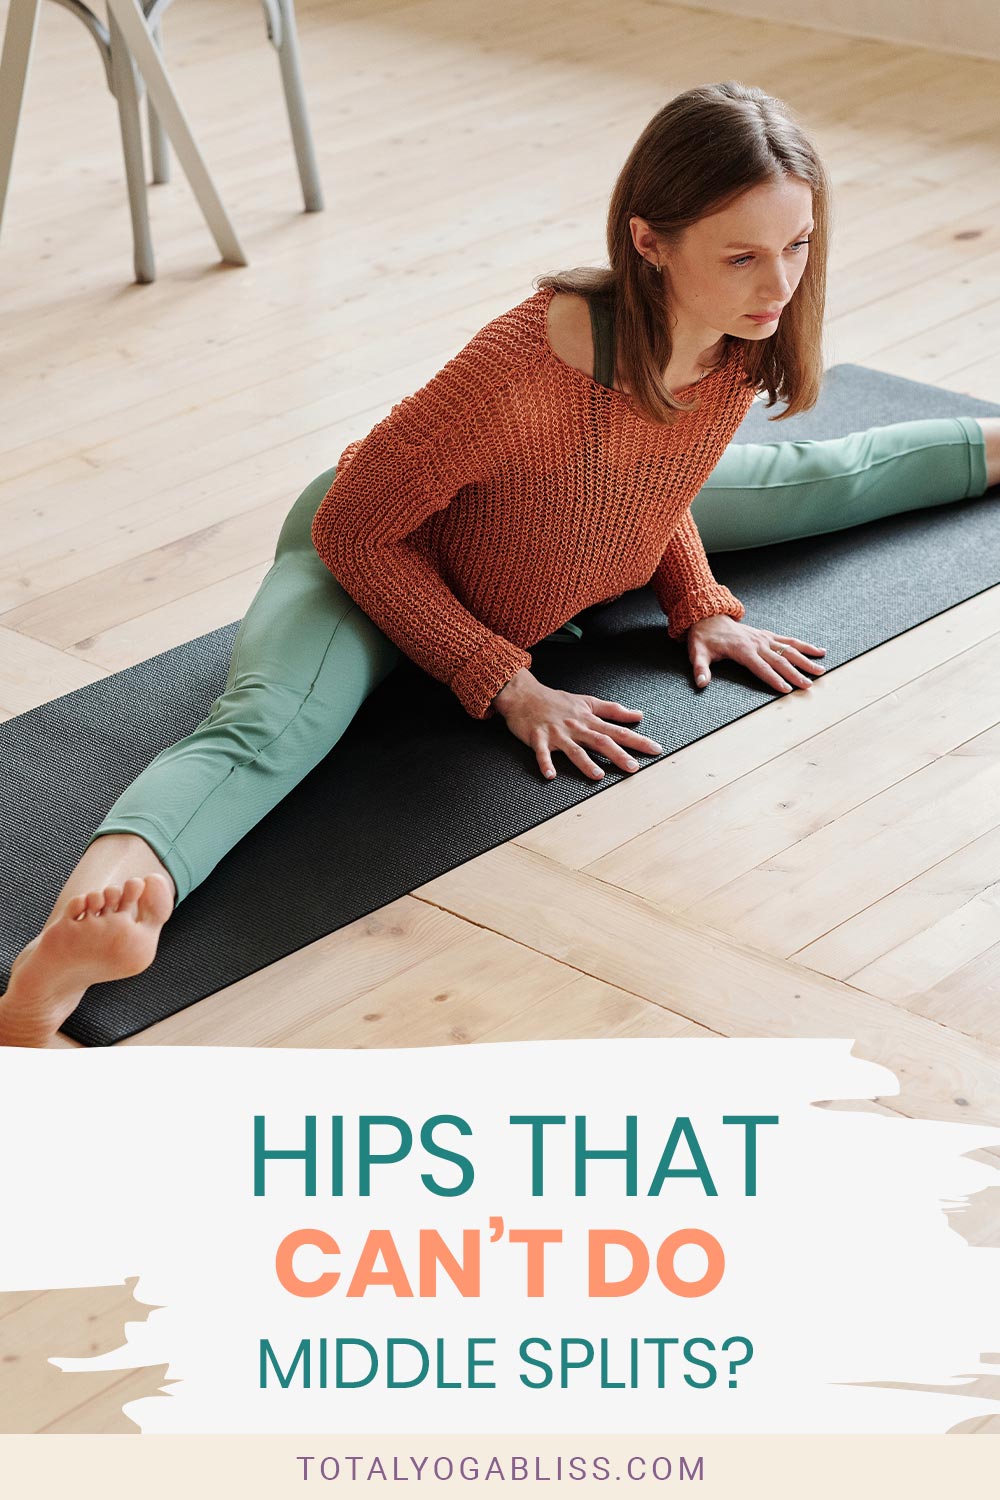 Hips That Can’t Do Middle Splits?